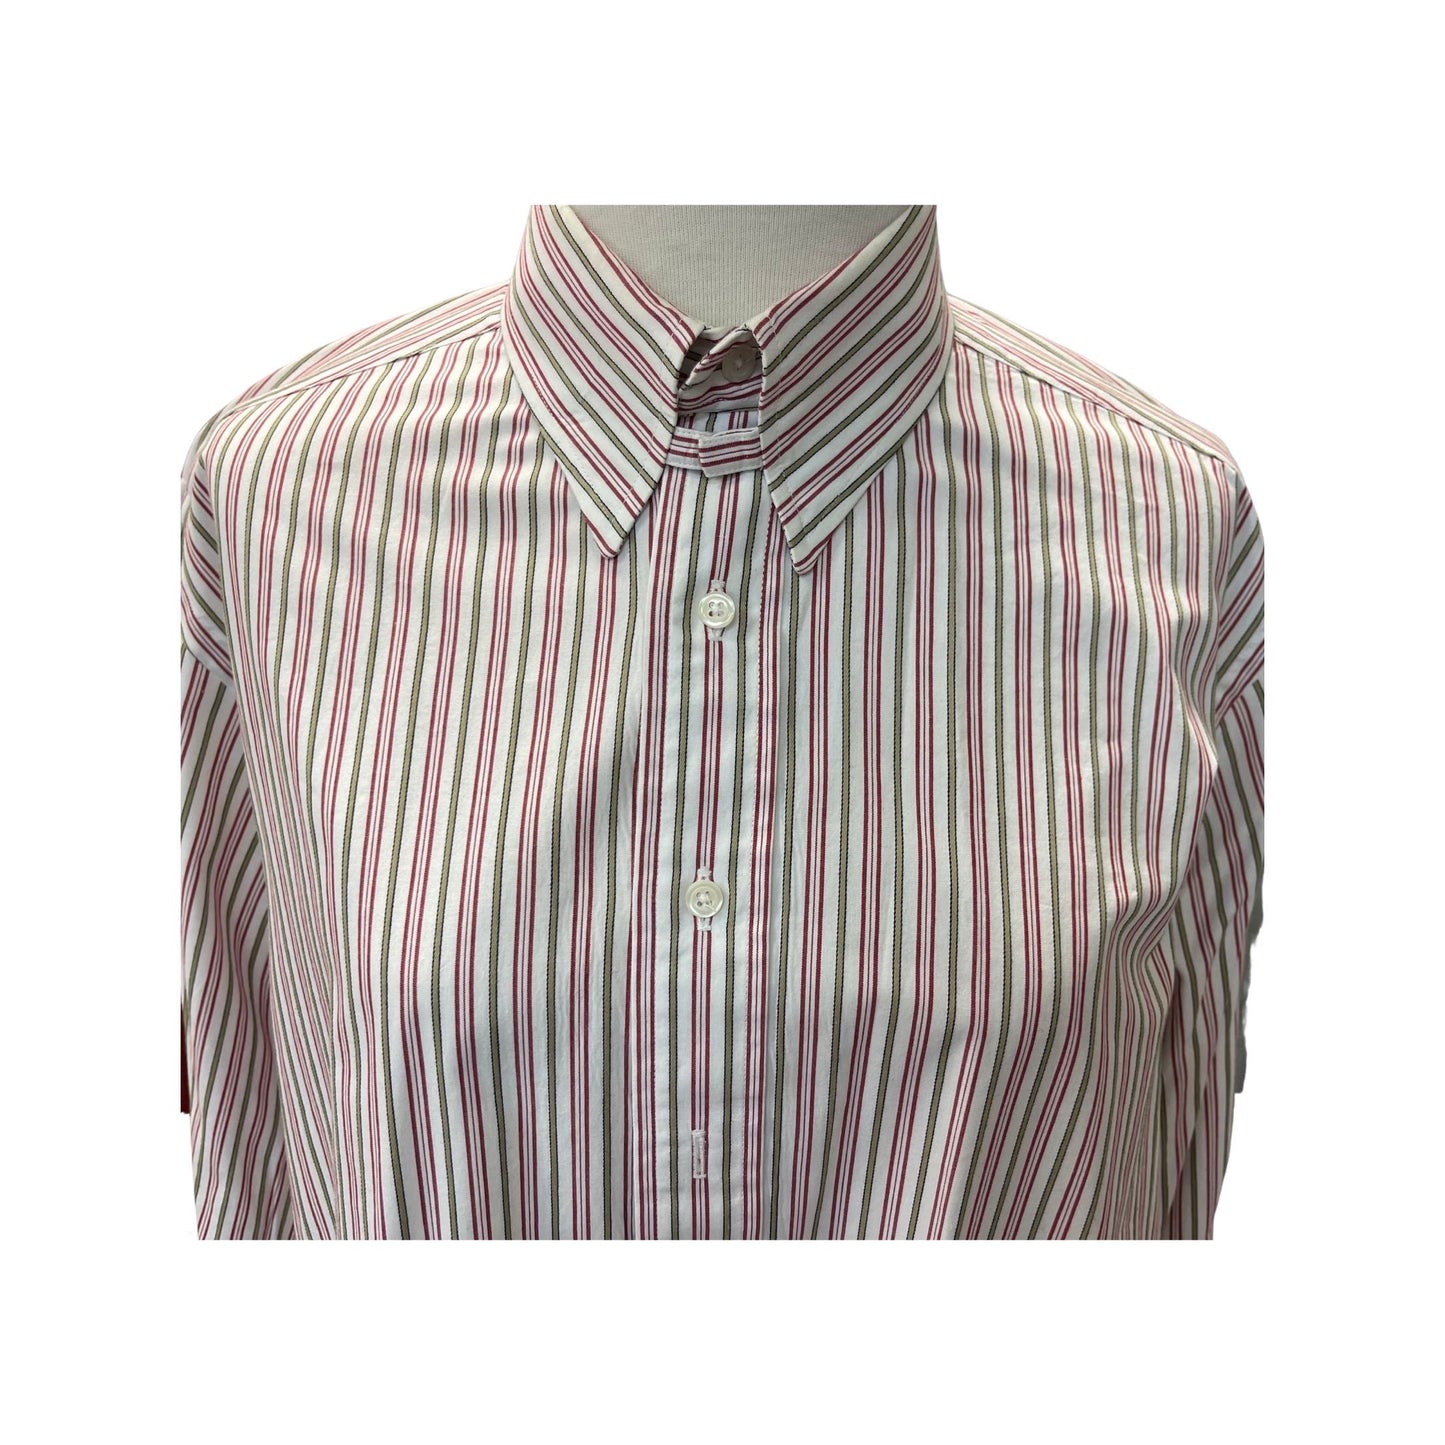 Shirt Becker Brothers White with Red and Gold Stripe